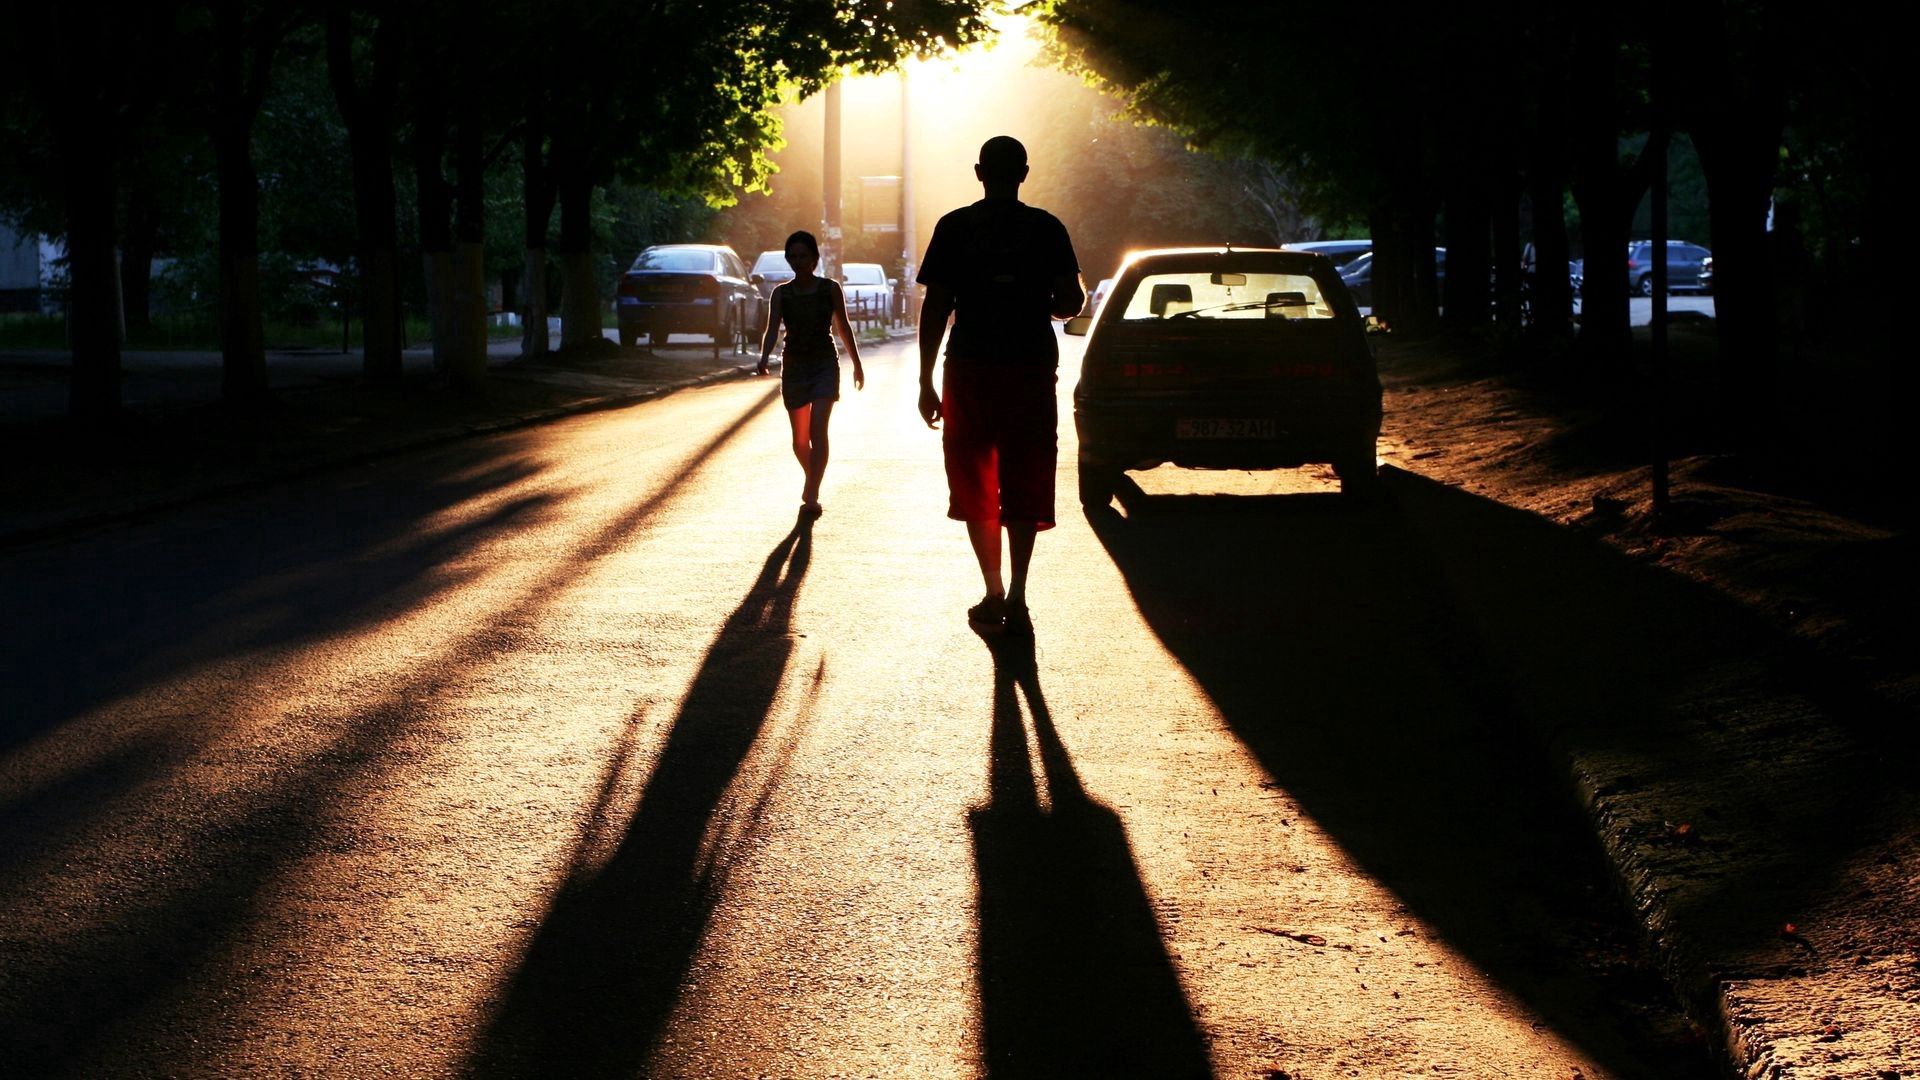 Desktop FHD people, cars, miscellanea, miscellaneous, road, silhouettes, shadow, evening